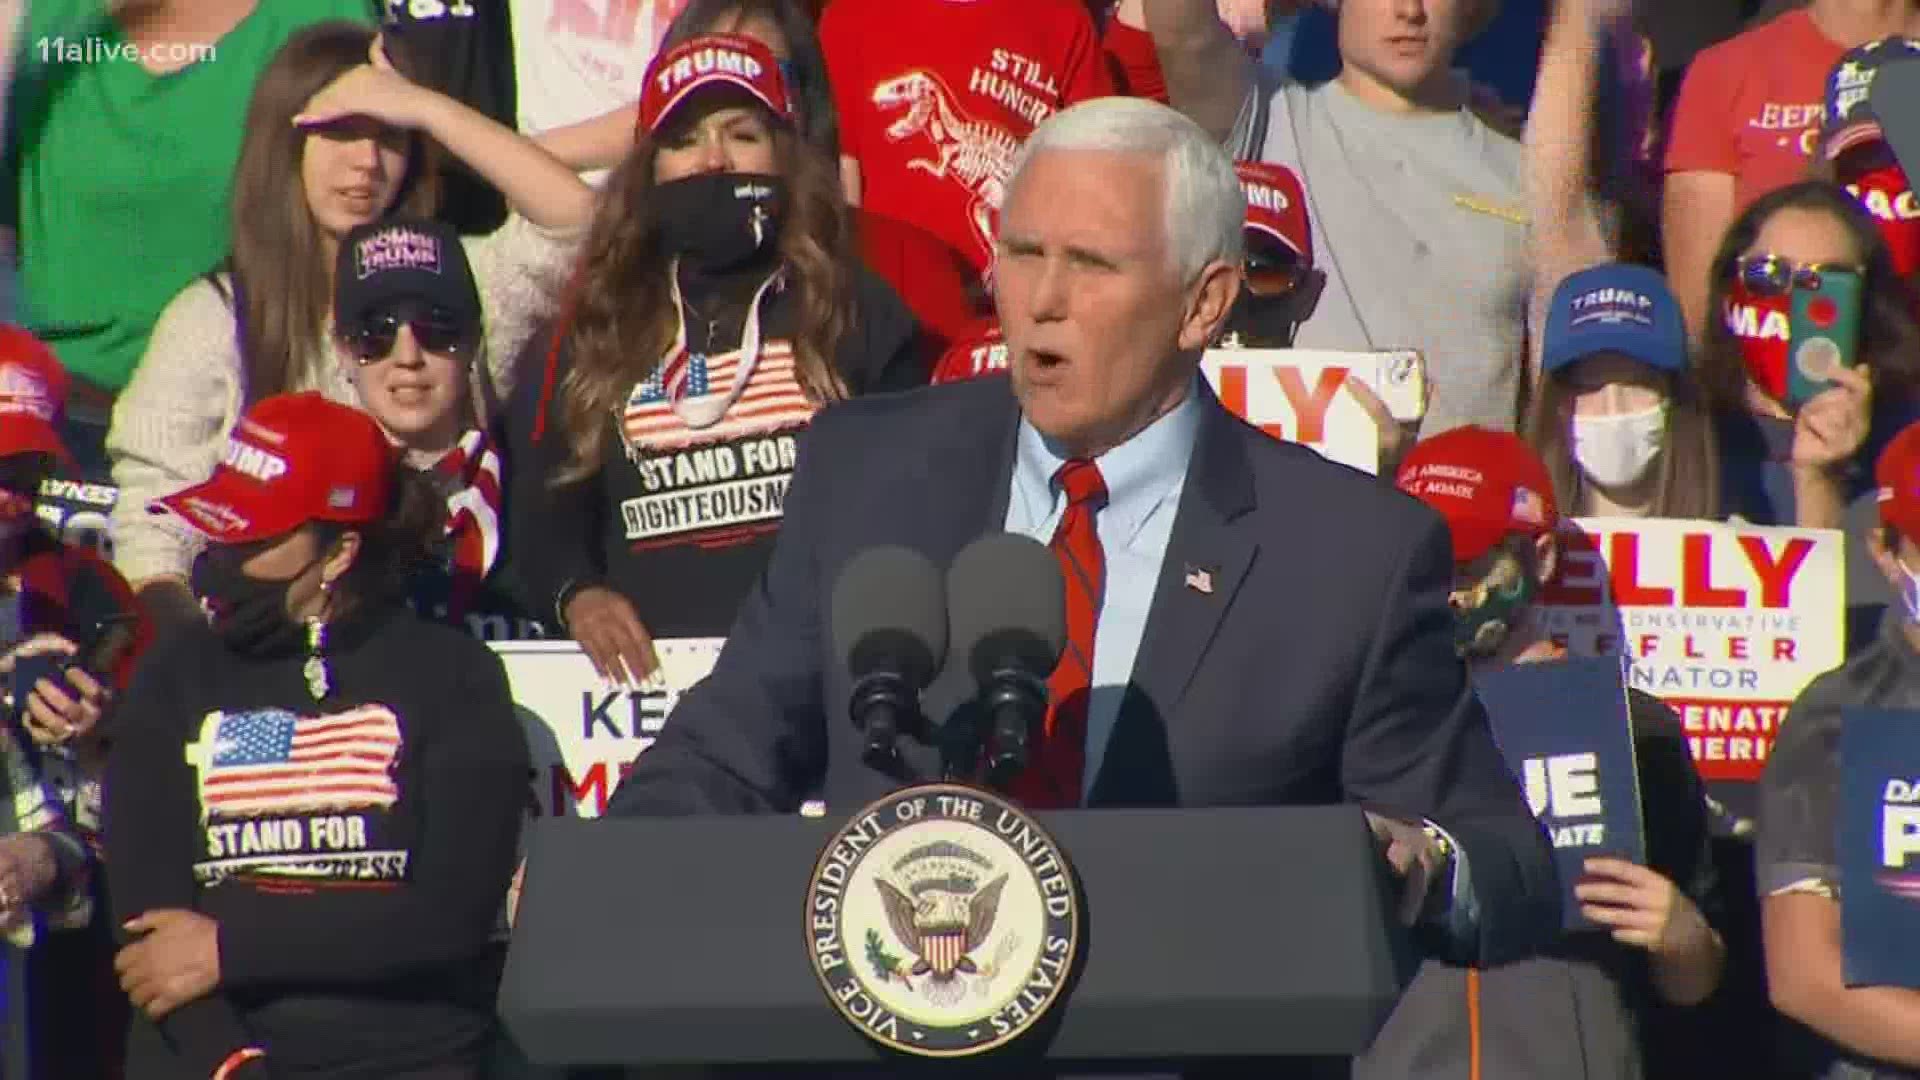 The Vice President was back in Georgia again Thursday to drum up support for Sens. Kelly Loeffler and David Perdue ahead of a high-stakes January runoff.